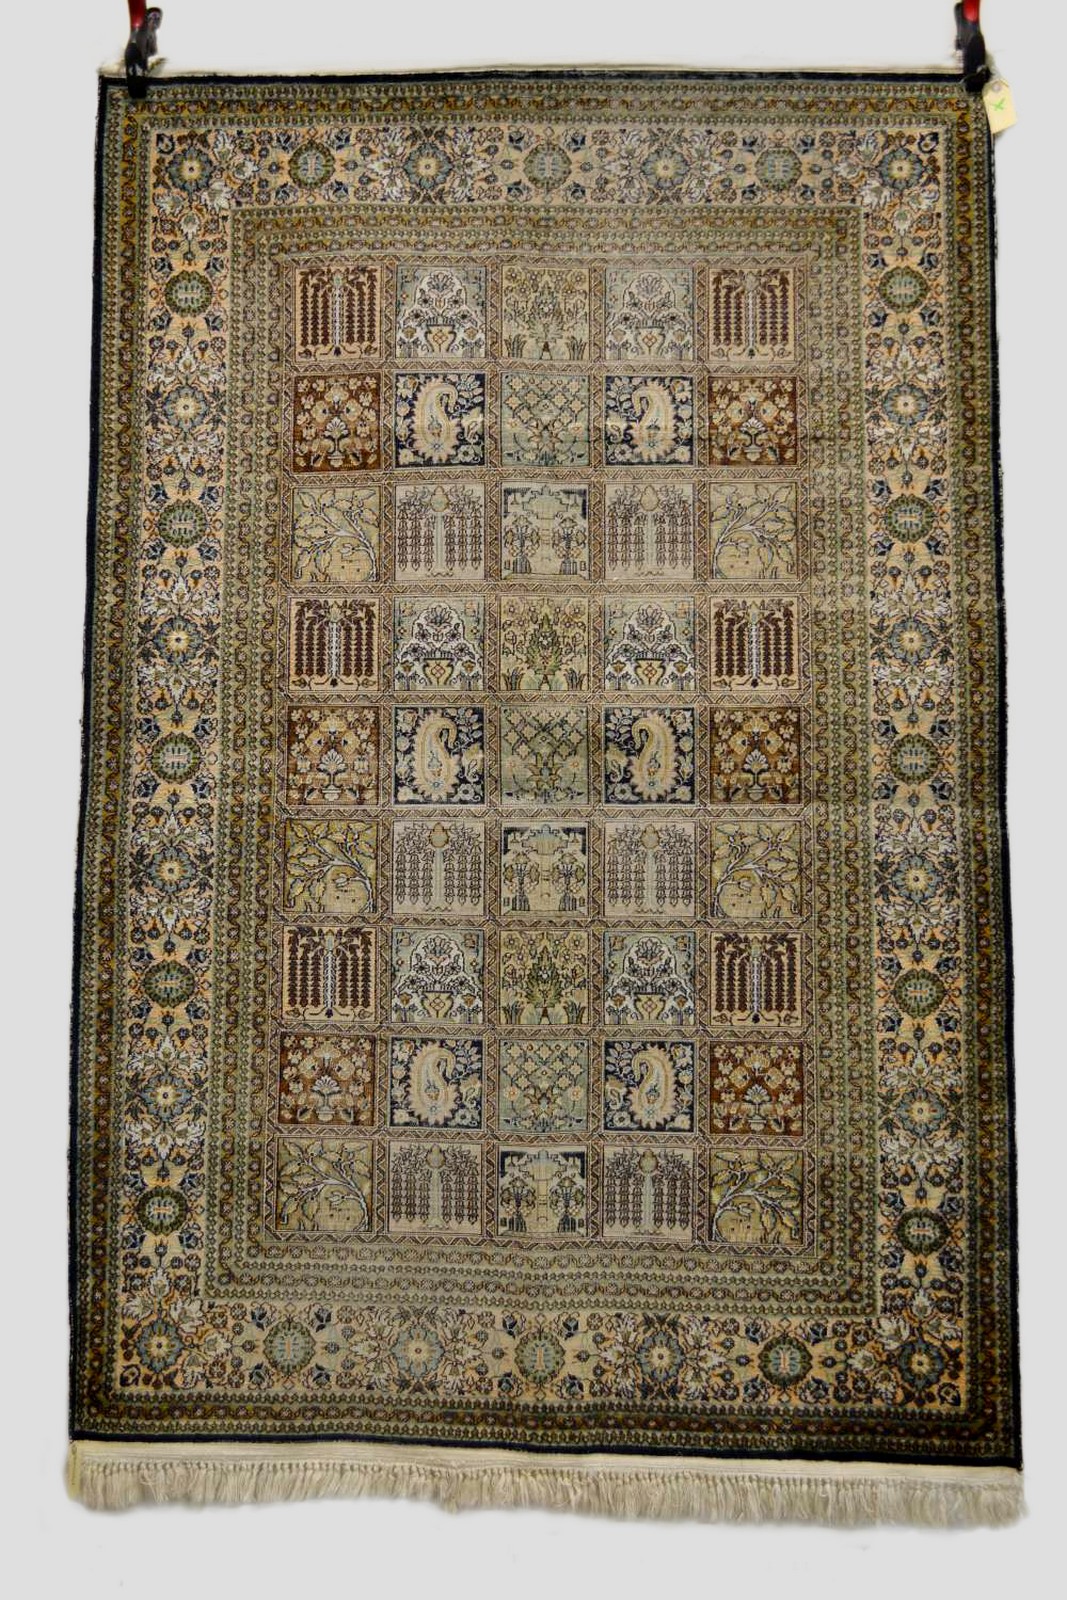 Kashmiri silk pile rug, north India, mid-20th century, 6ft. 1in. x 4ft. 1.86m. x 1.22m. Overall